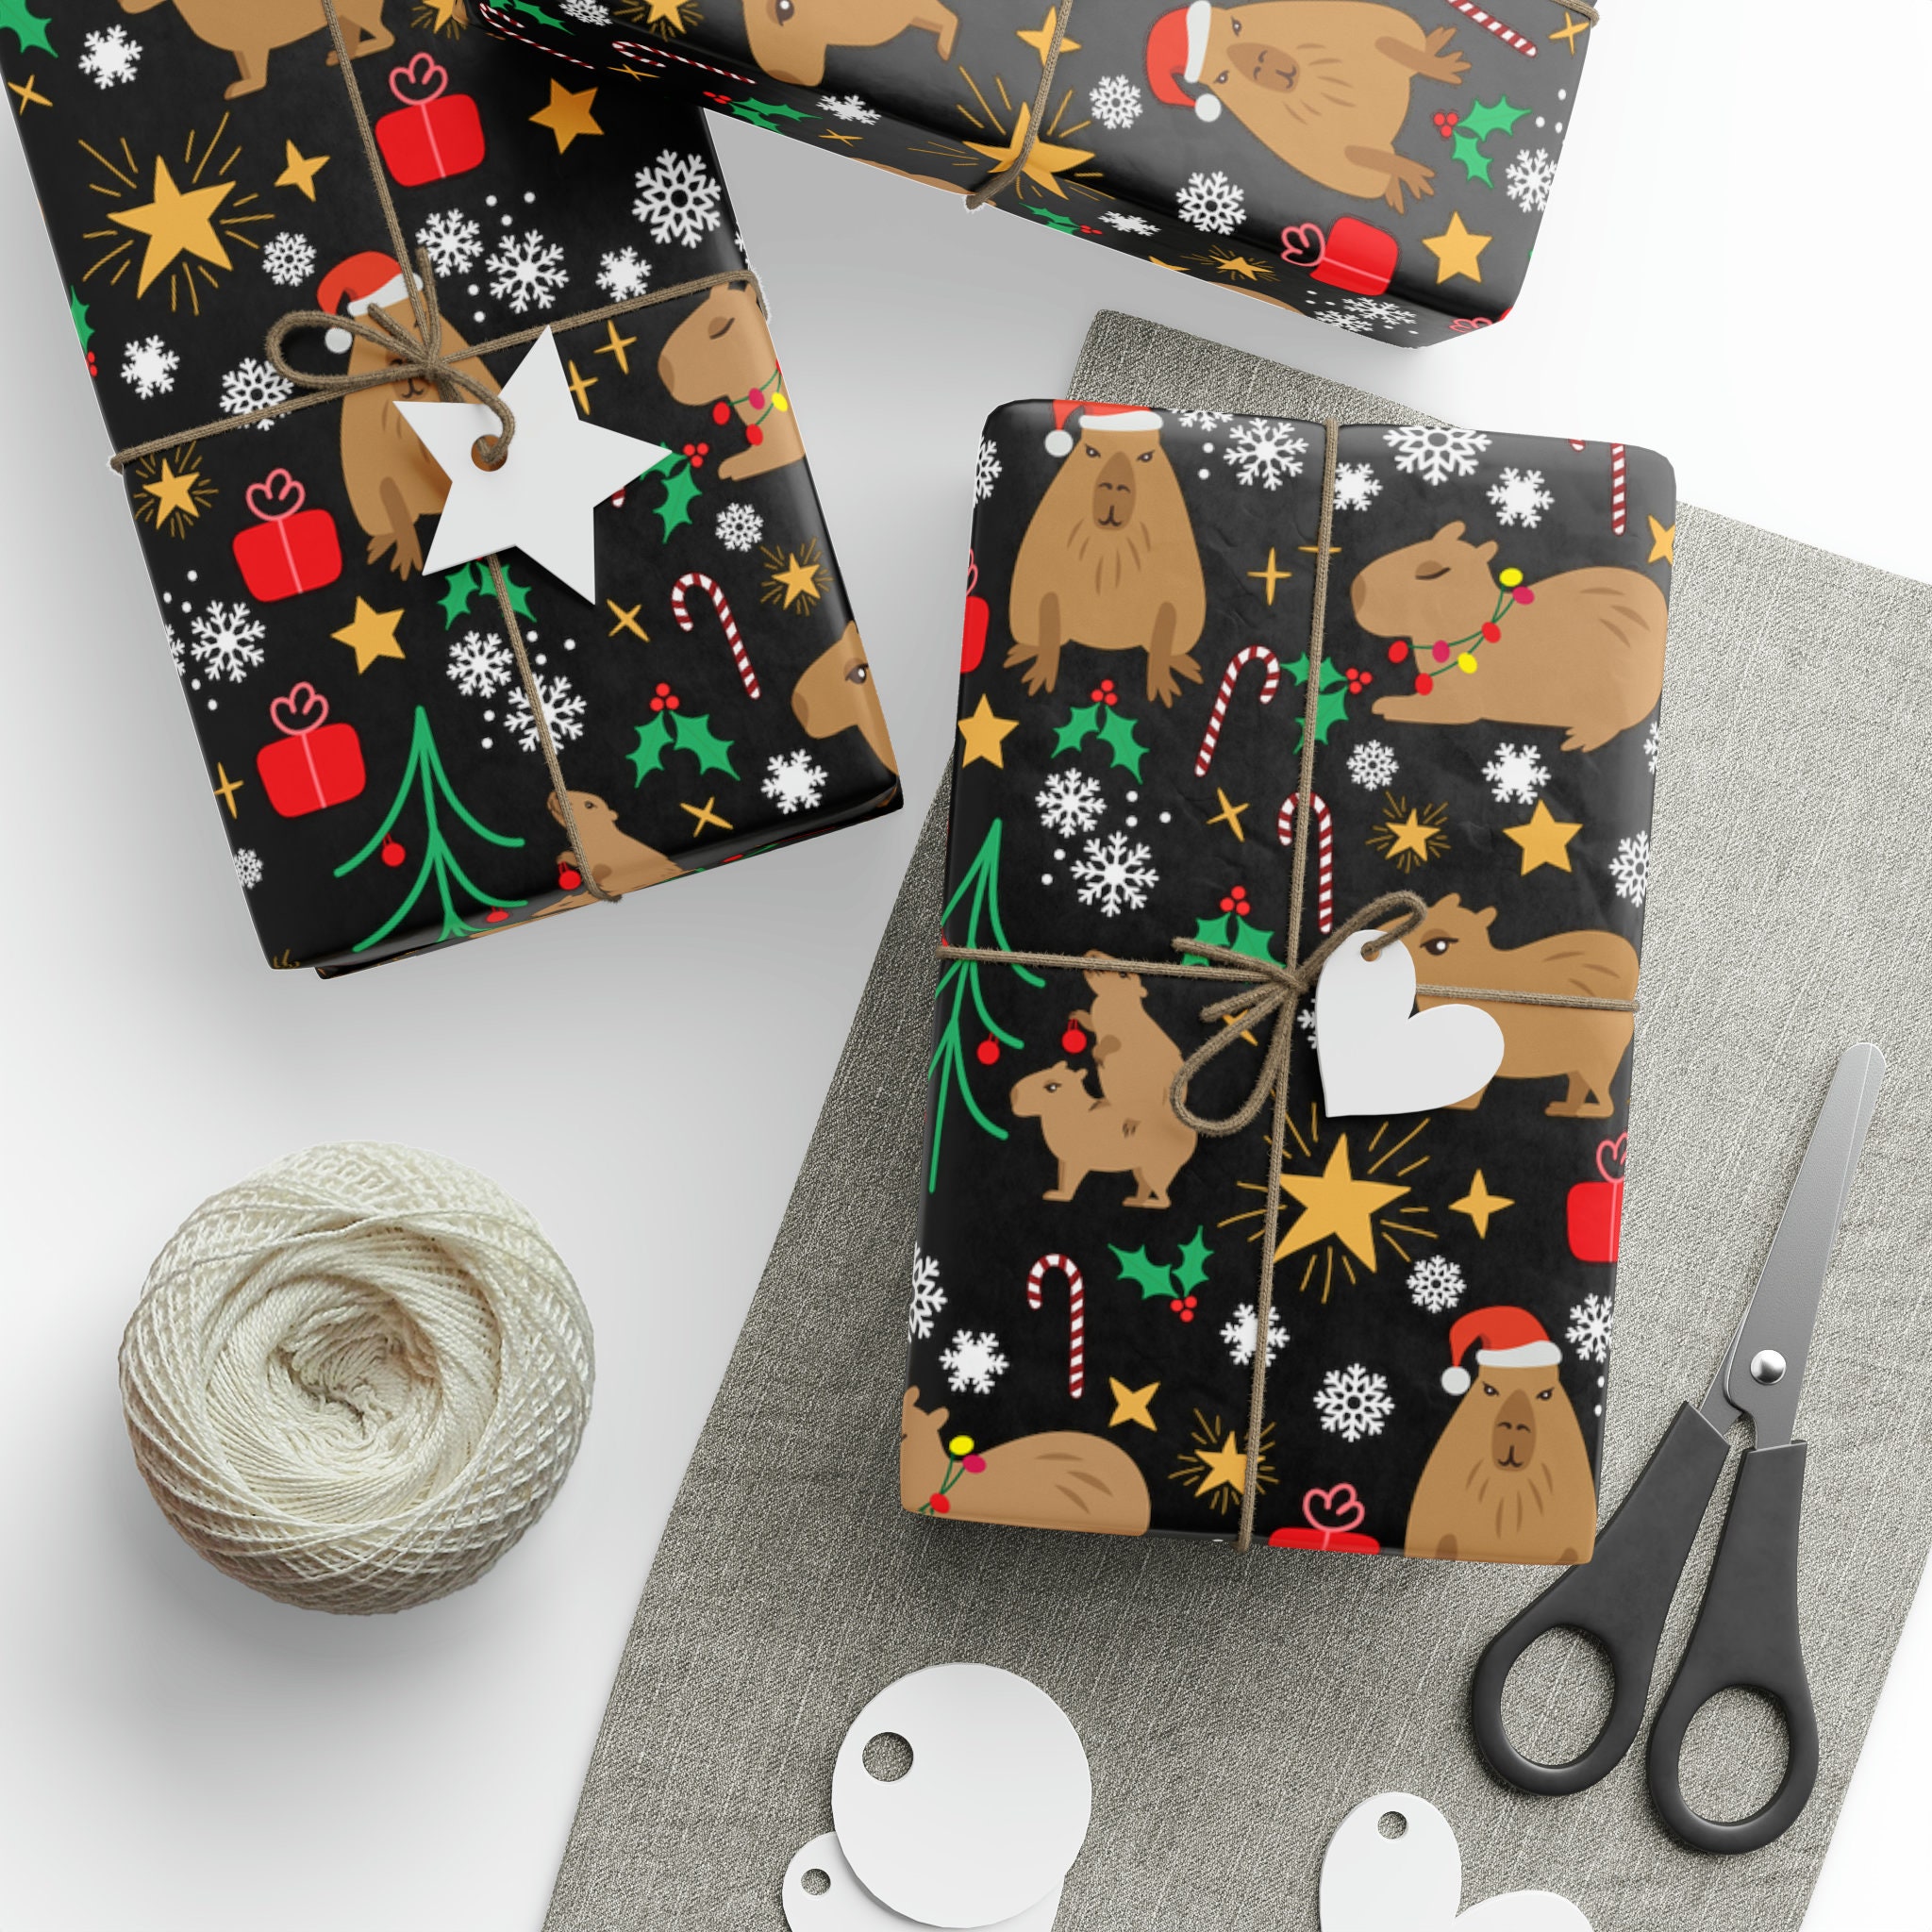 Hallmark Card Store - Barbados - Make your gift shine with elegant, fun  gift wrap from Hallmark! From gift bags and tissue to wrapping paper, bows  and gift boxes - let us